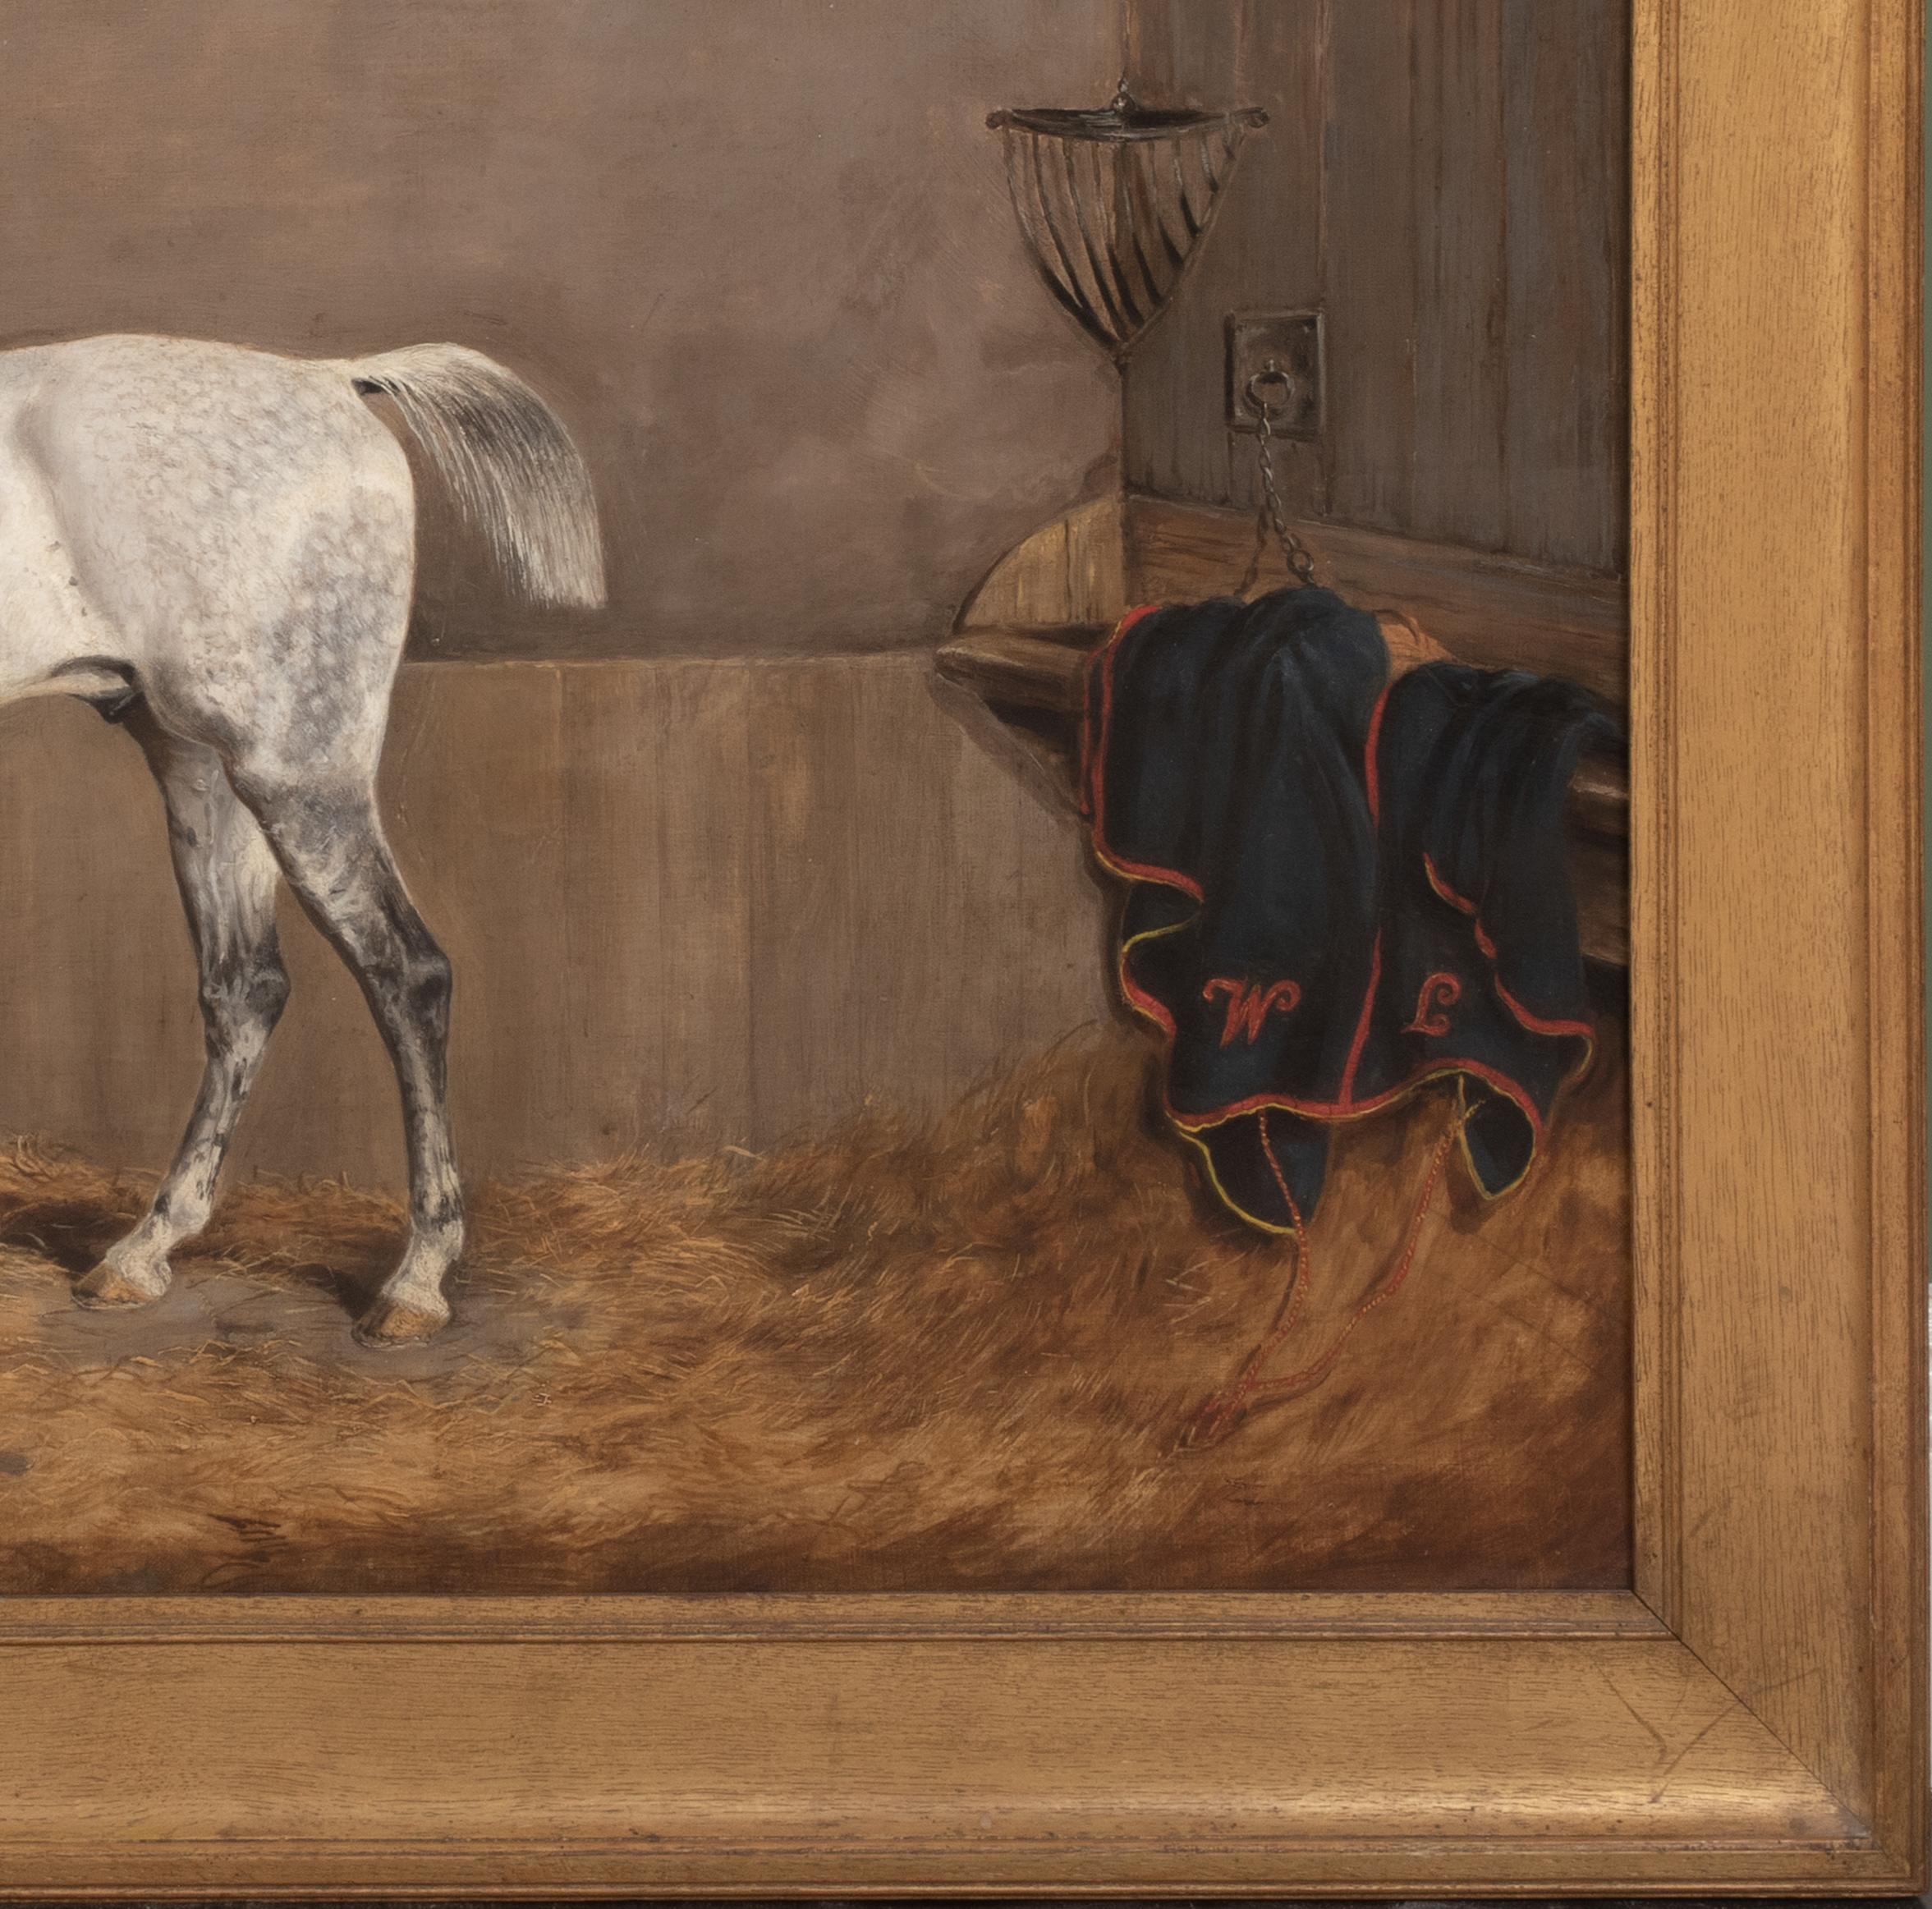 Portrait Of A Dapple Grey Racehorse, dated 1874

by John Frederick II HERRING (1815-1907) to $270,000

Large 19th century portrait of a dapple grey racehorse in a stable, oil on canvas by John Frederick Herring. Excellent quality and condition large